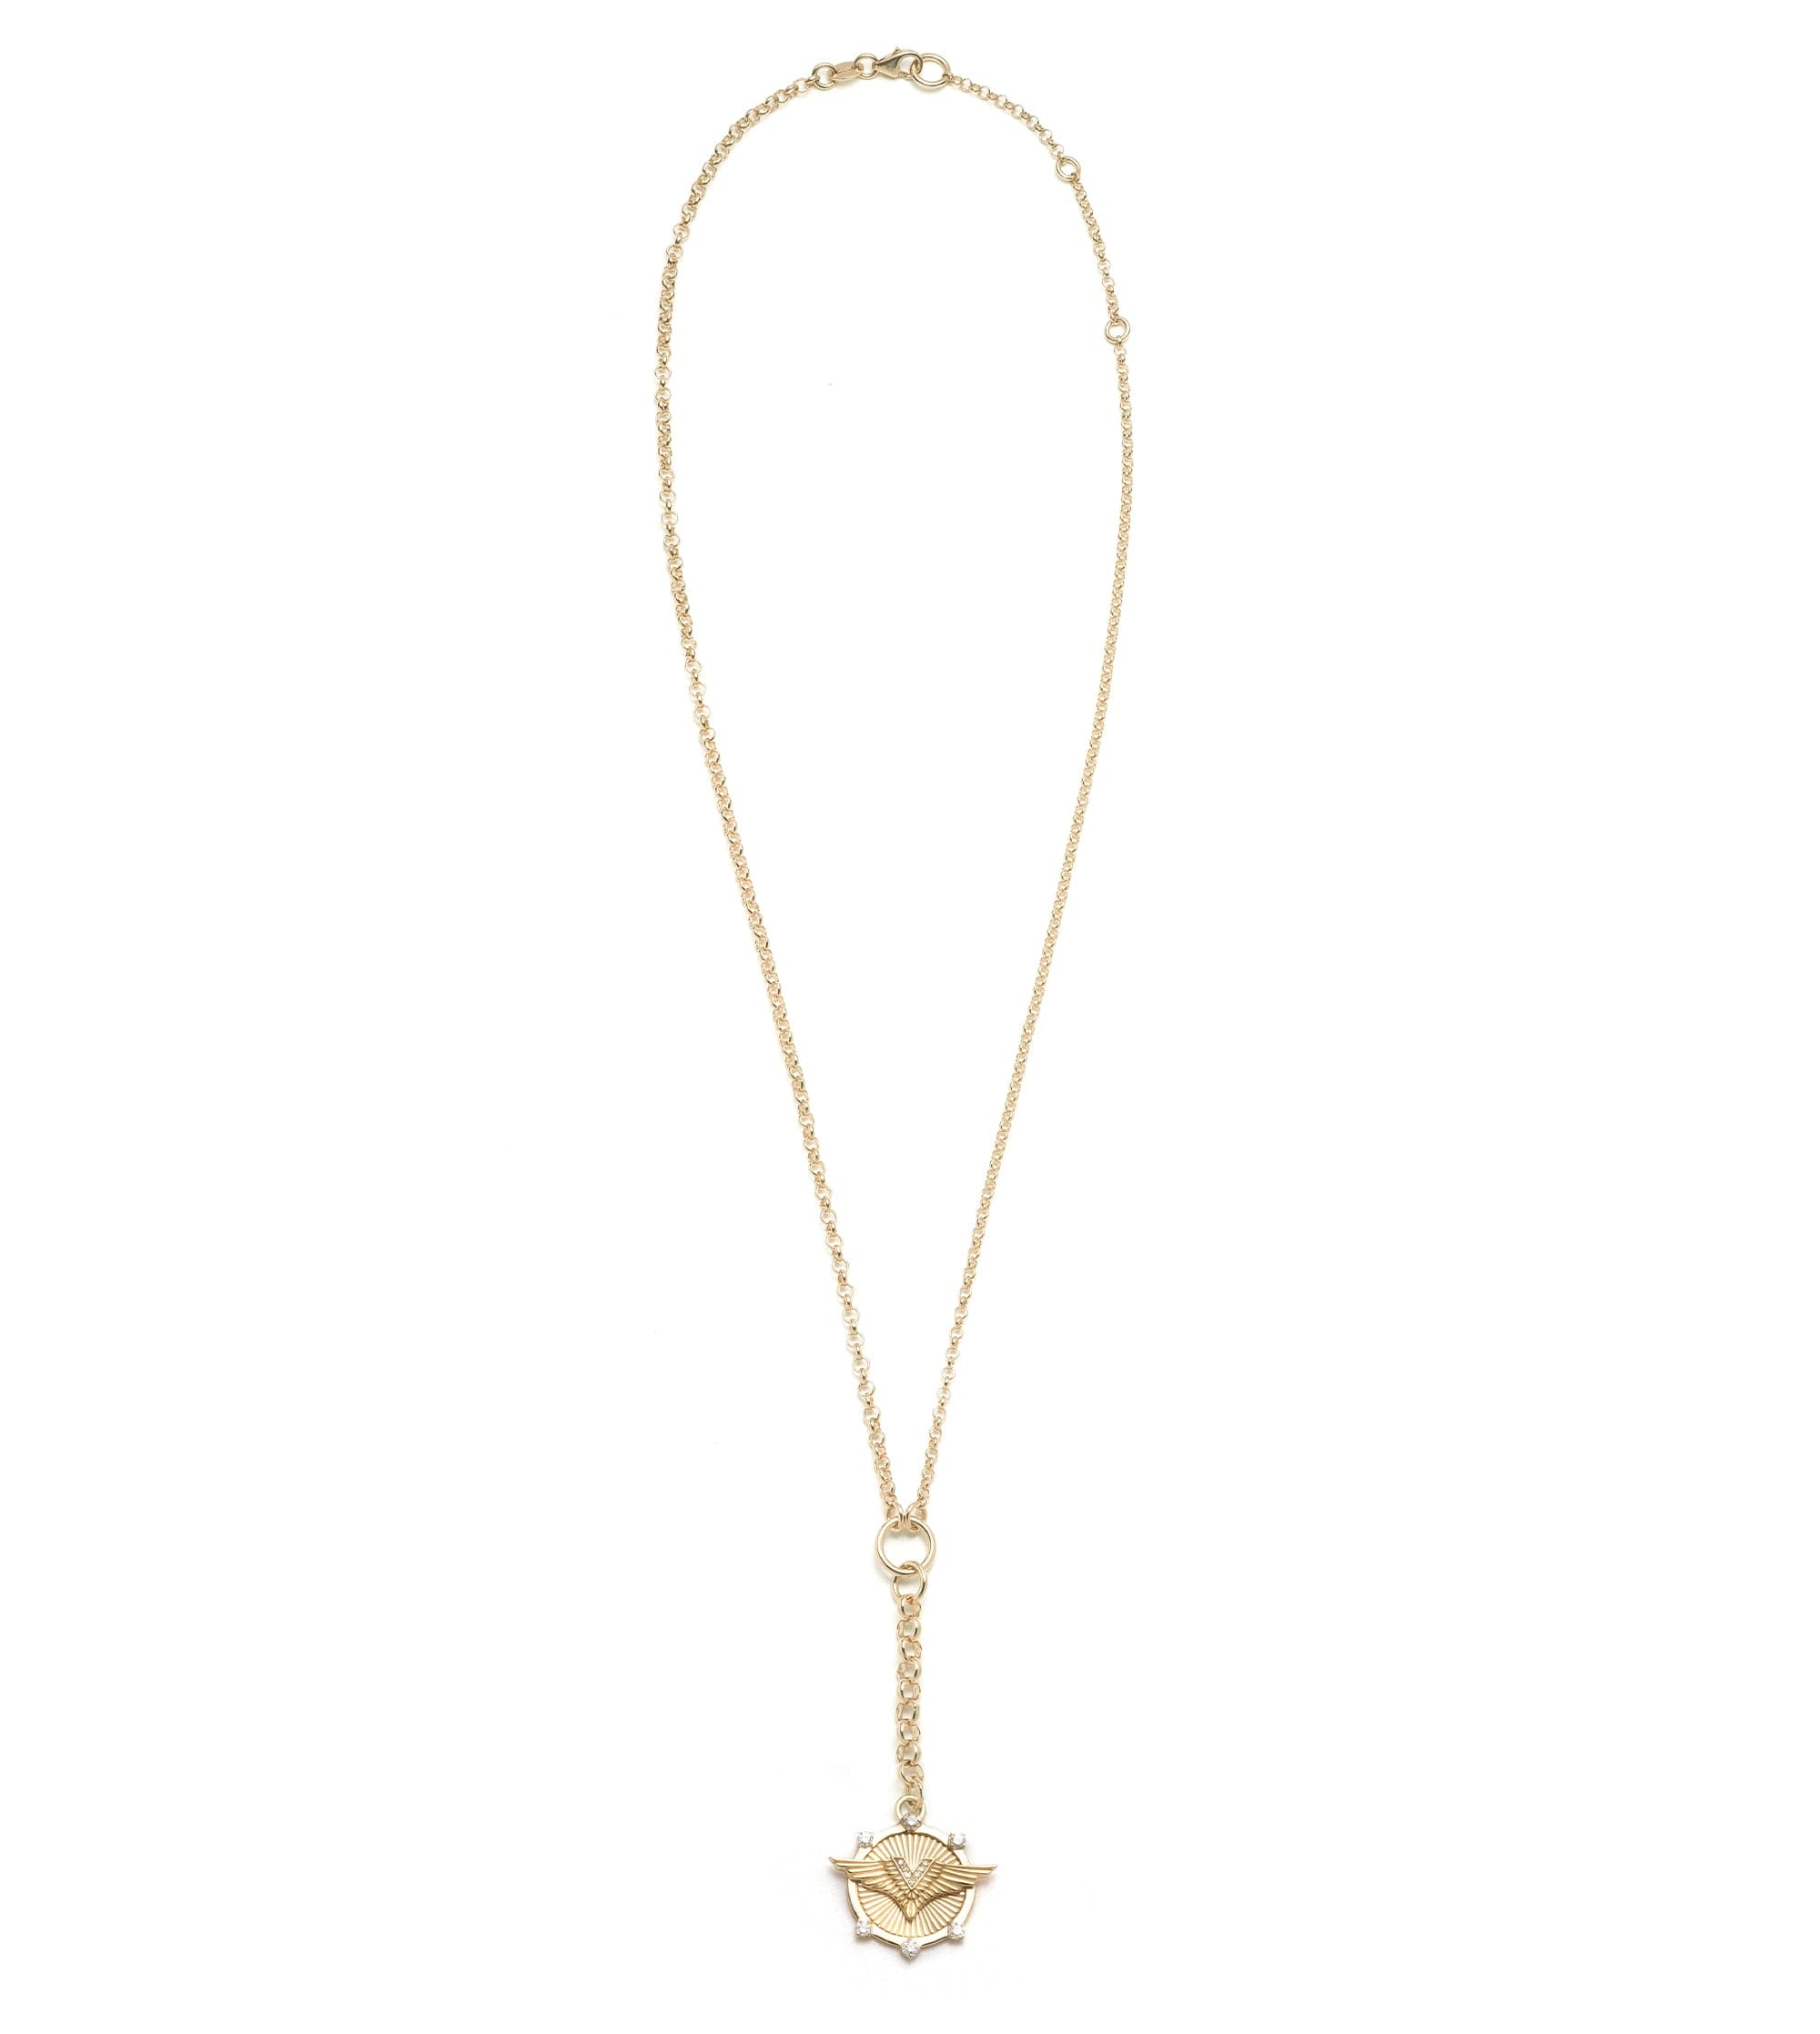 Vivacity : Small Mixed Belcher Extension Chain Necklace